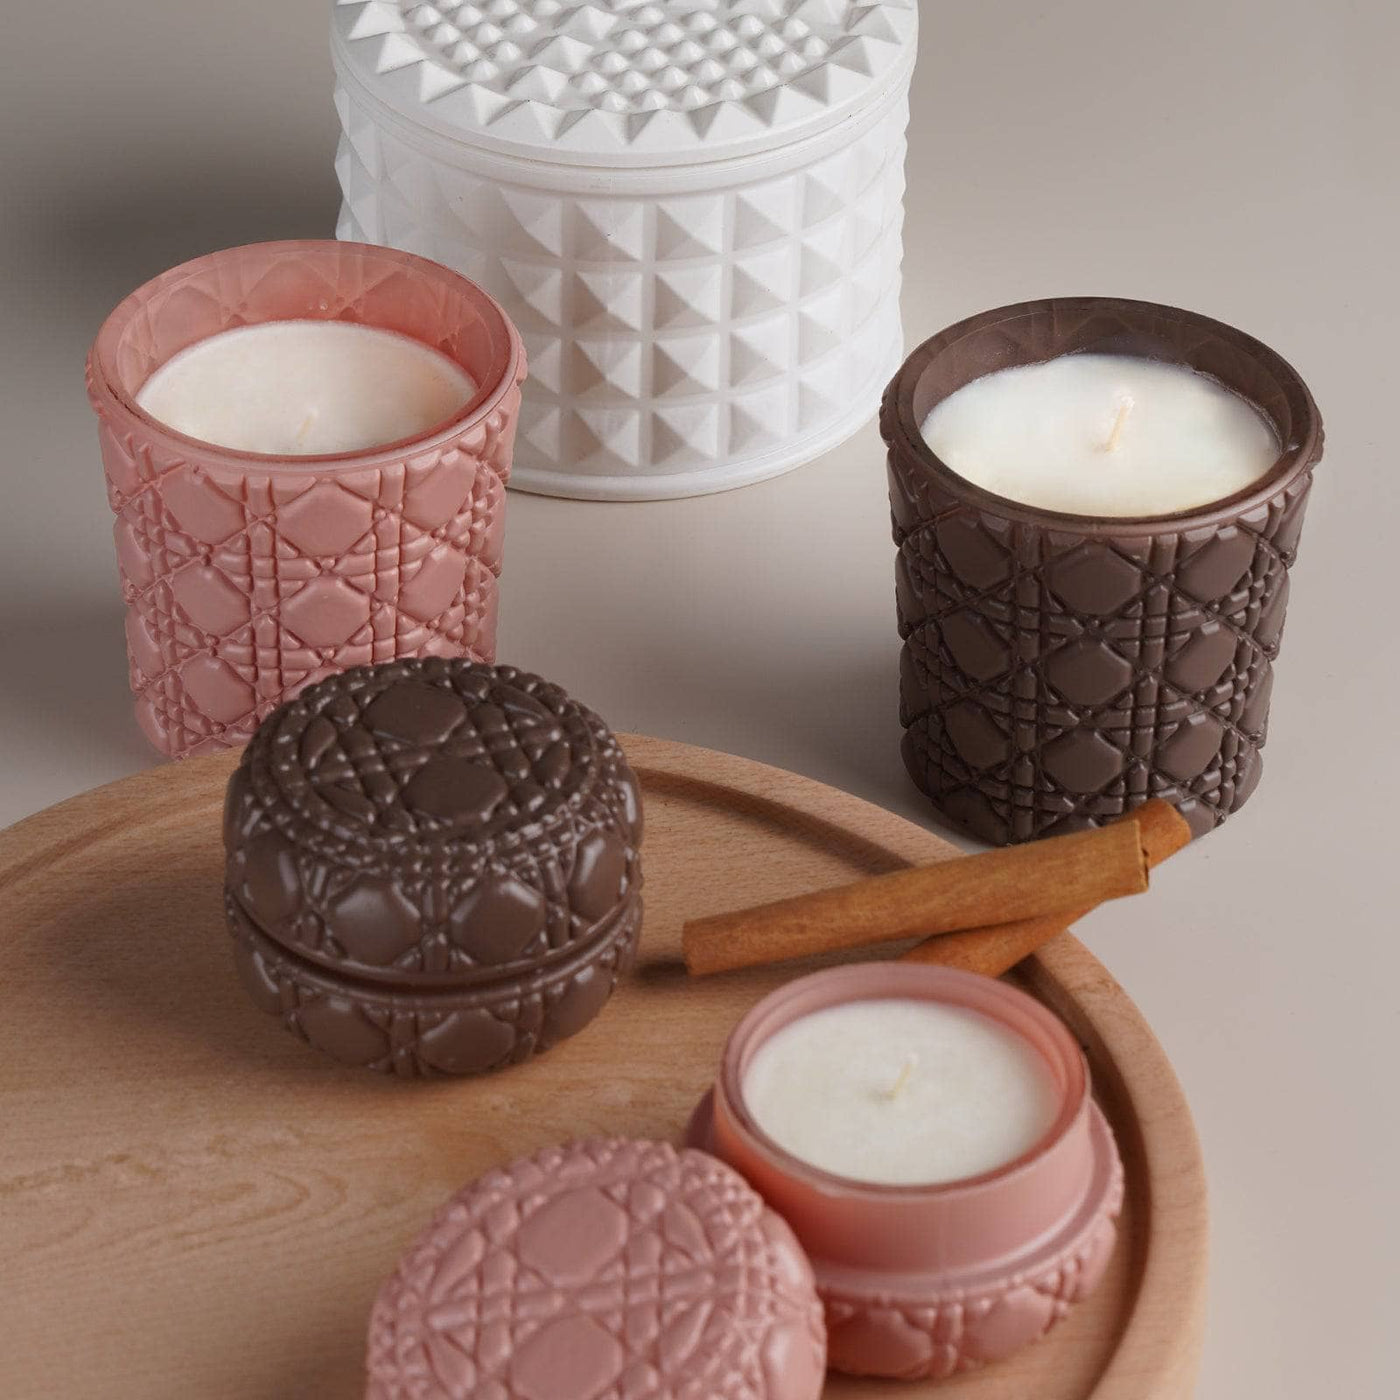 Uplift and Unwind Set of 2 Mini Soy Wax Candles, 50 g each Candles sazy.com